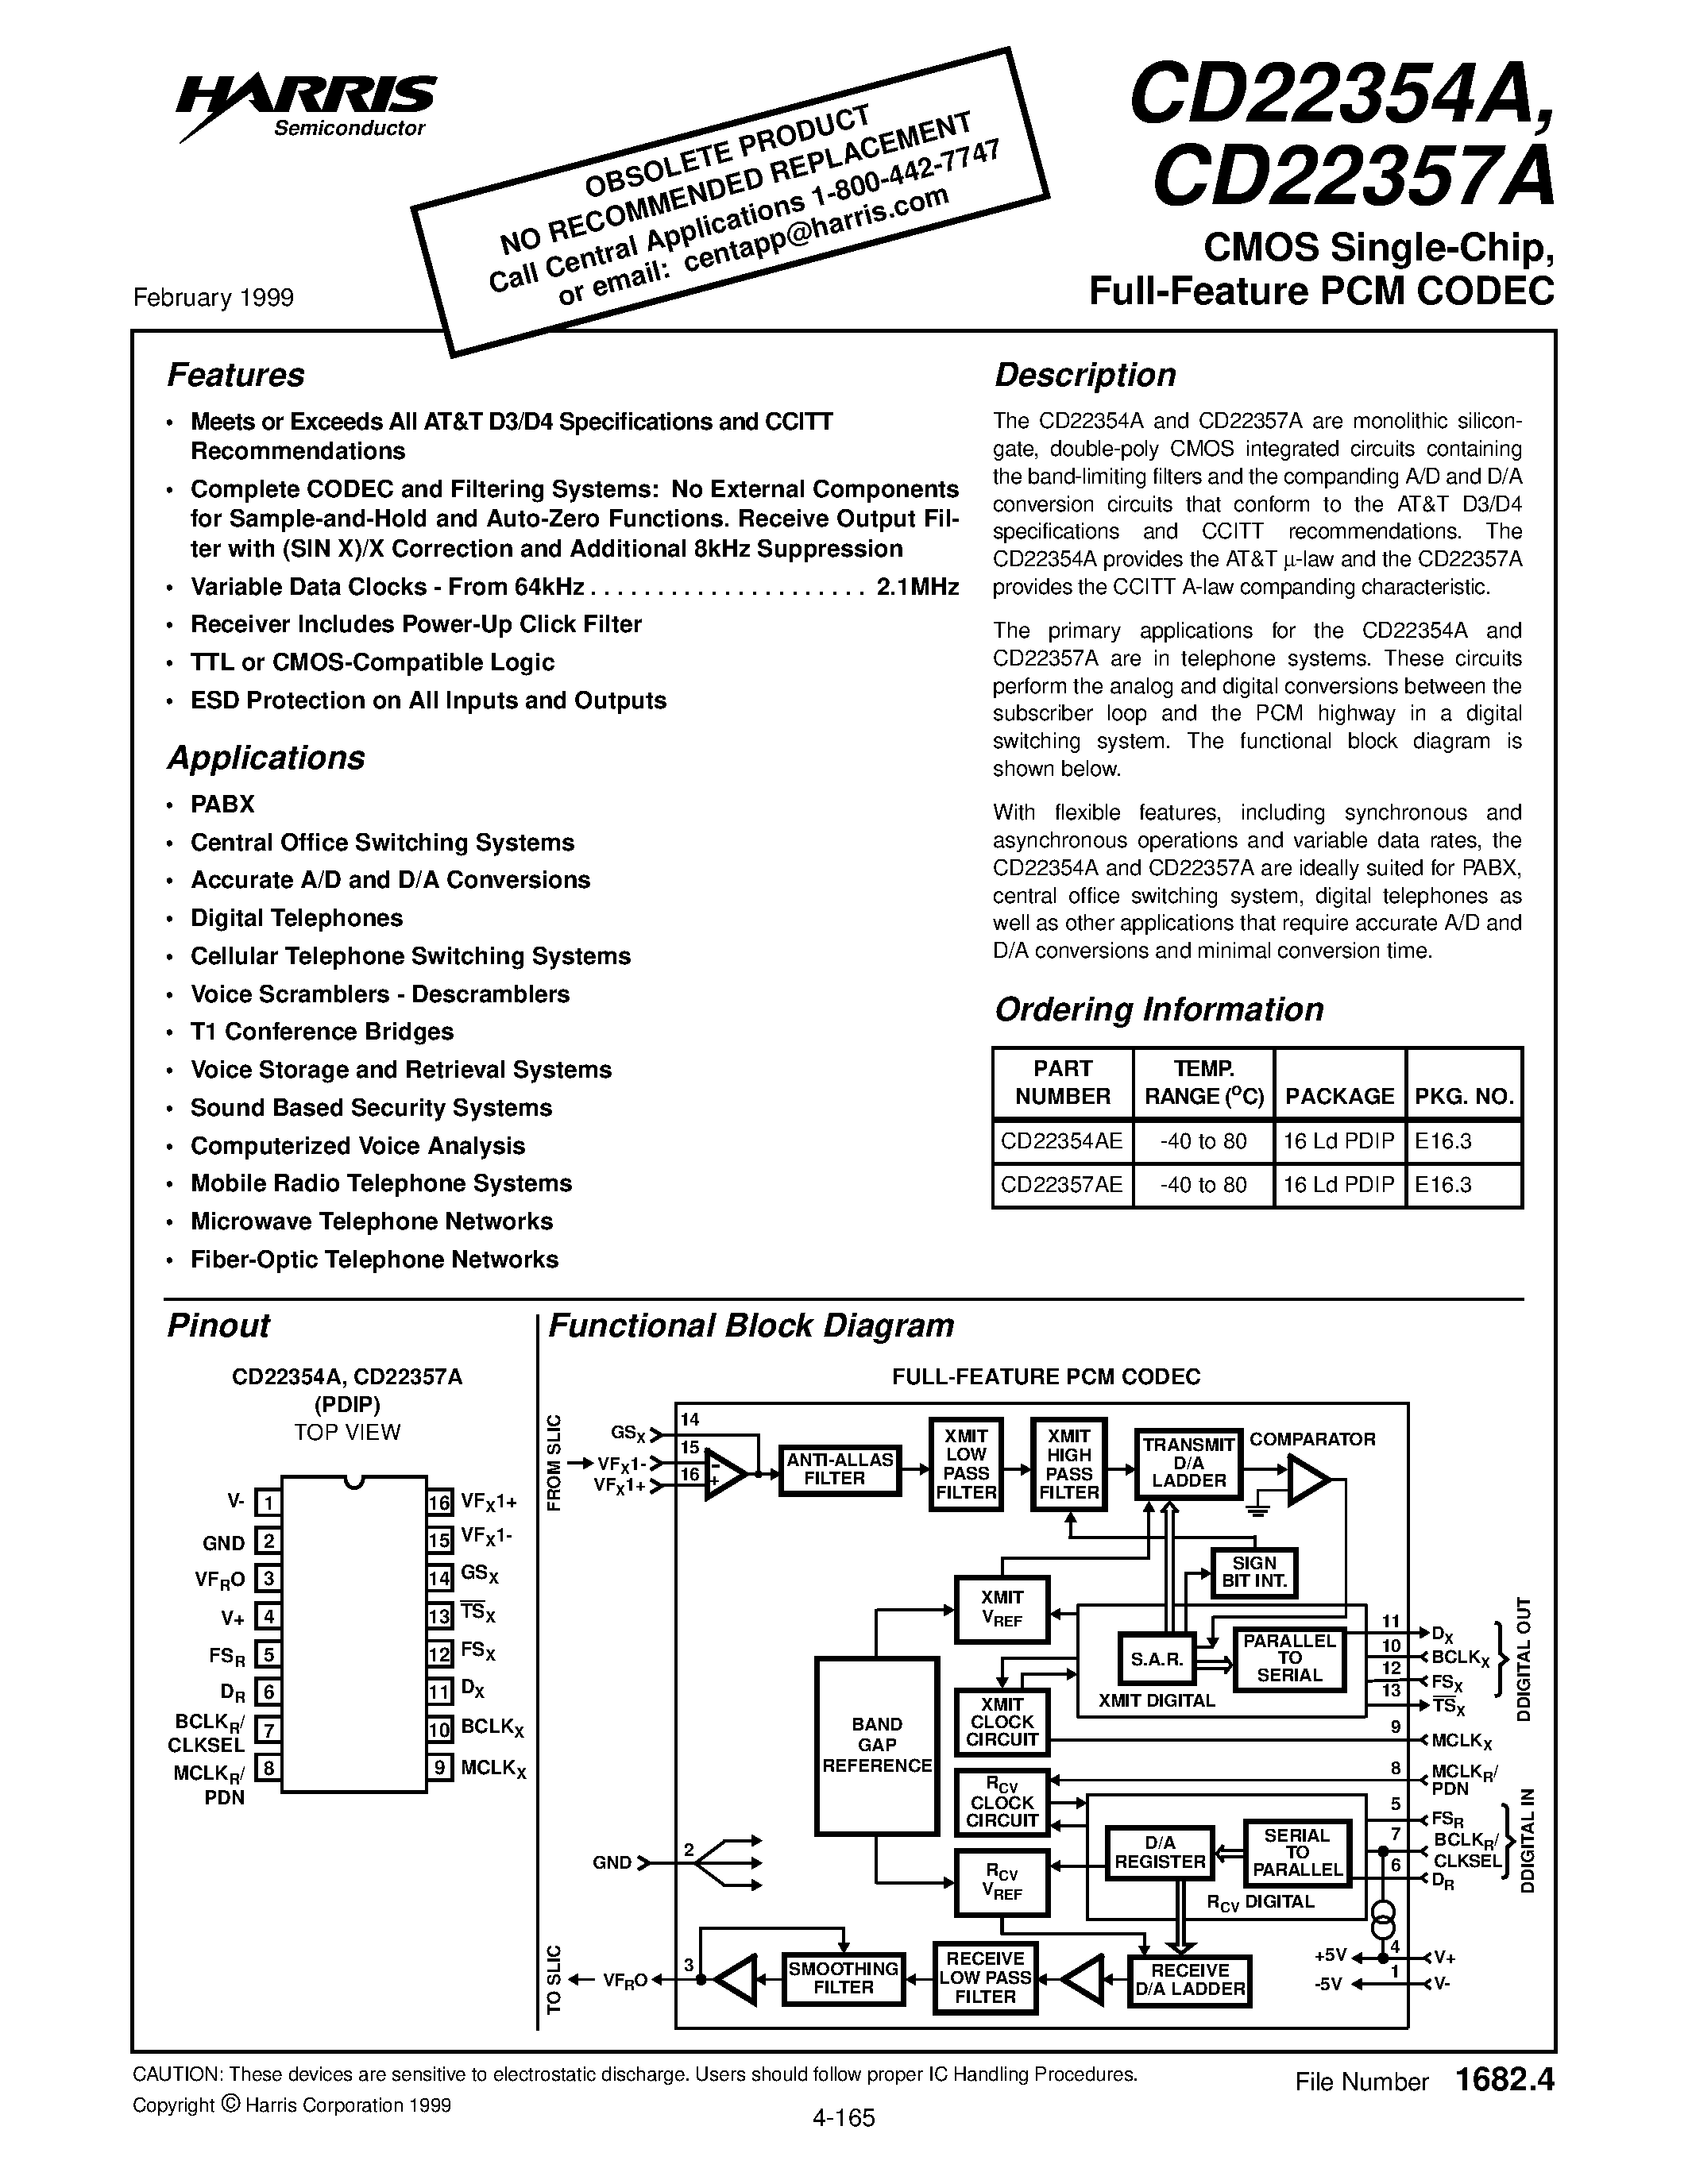 Datasheet CD22357AE - CMOS Single-Chip/ Full-Feature PCM CODEC page 1